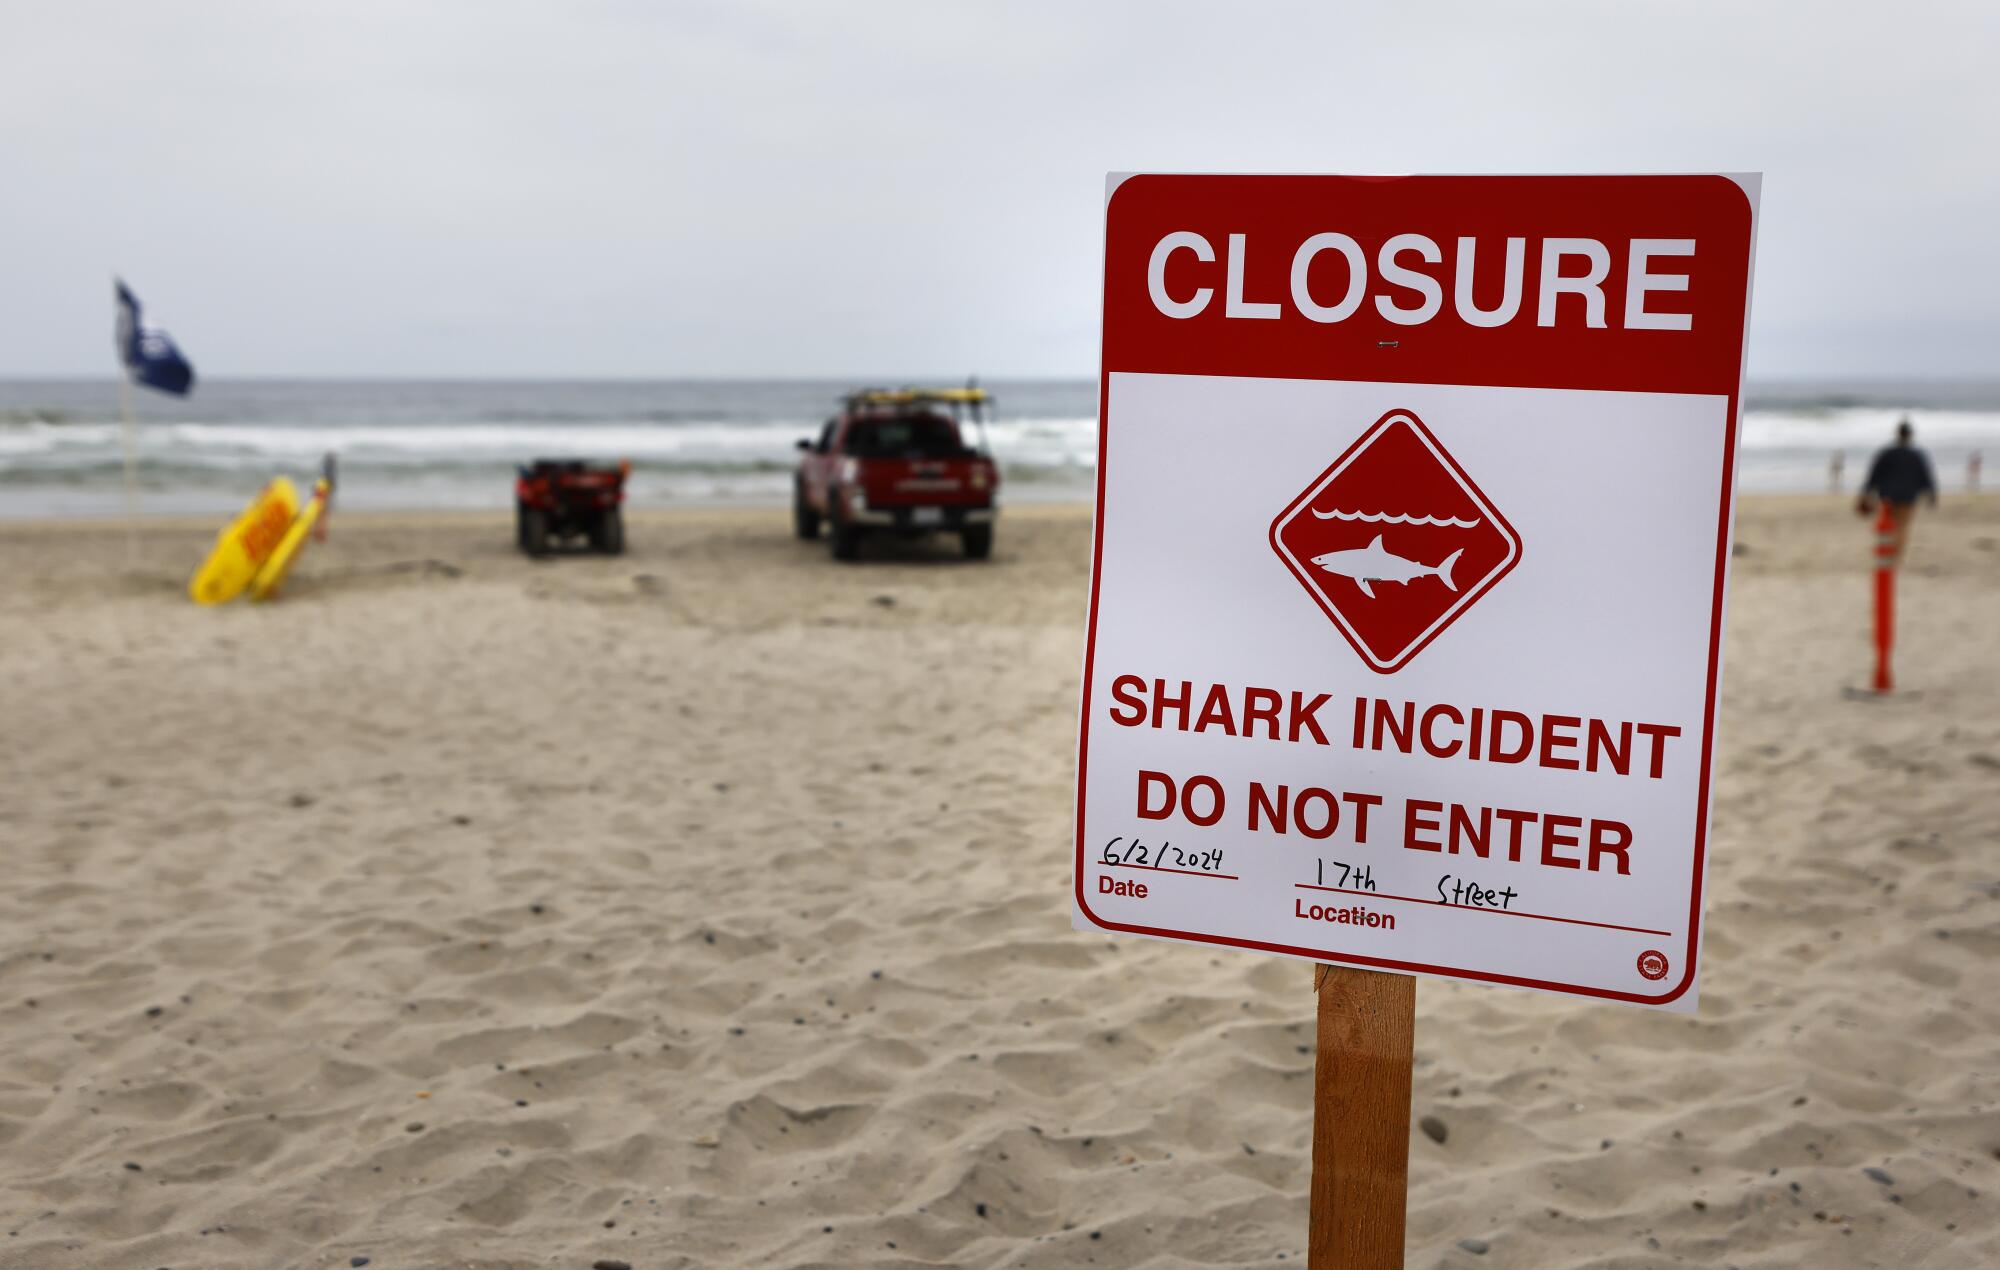 A 2-mile stretch of beach was closed to swimmers and surfers as a precaution after a shark attack.